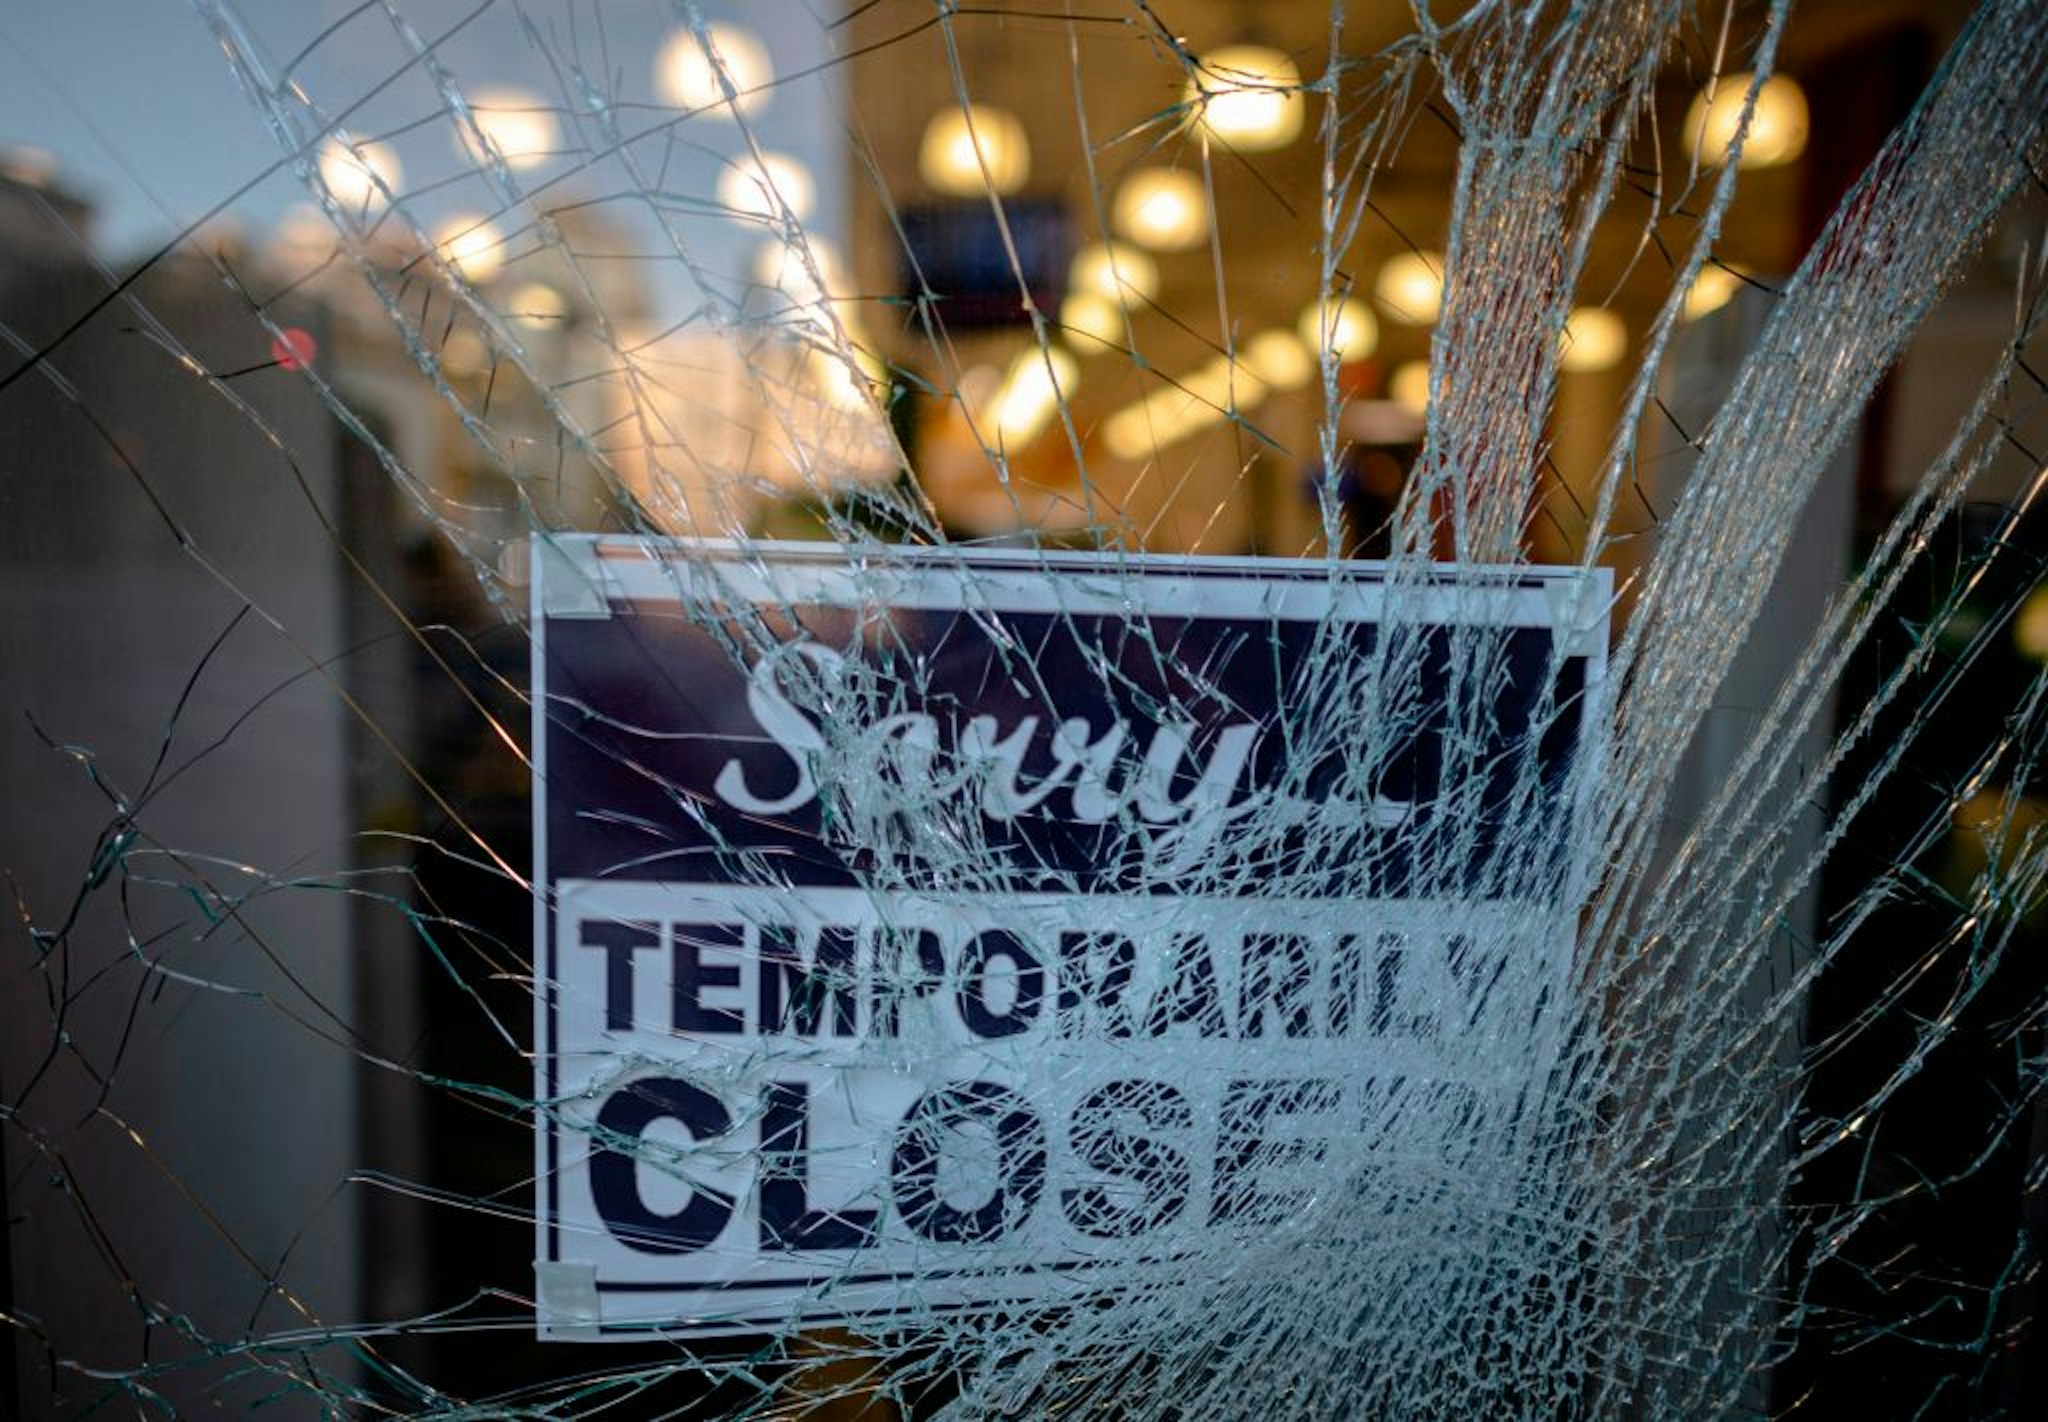 A sign reading "sorry temporarily closed" is seen behind a shattered glass of a storefront after a night of protest over the death of African-American man George Floyd in Minneapolis on June 1, 2020 in Lower Manhattan in New York City. - Thousands of National Guard troops patrolled major US cities after five consecutive nights of protests over racism and police brutality that boiled over into arson and looting, sending shock waves through the country. The death Monday of an unarmed black man, George Floyd, at the hands of police in Minneapolis ignited this latest wave of outrage in the US over law enforcement's repeated use of lethal force against African Americans -- this one like others before captured on cellphone video. (Photo by Johannes EISELE / AFP) (Photo by JOHANNES EISELE/AFP via Getty Images)